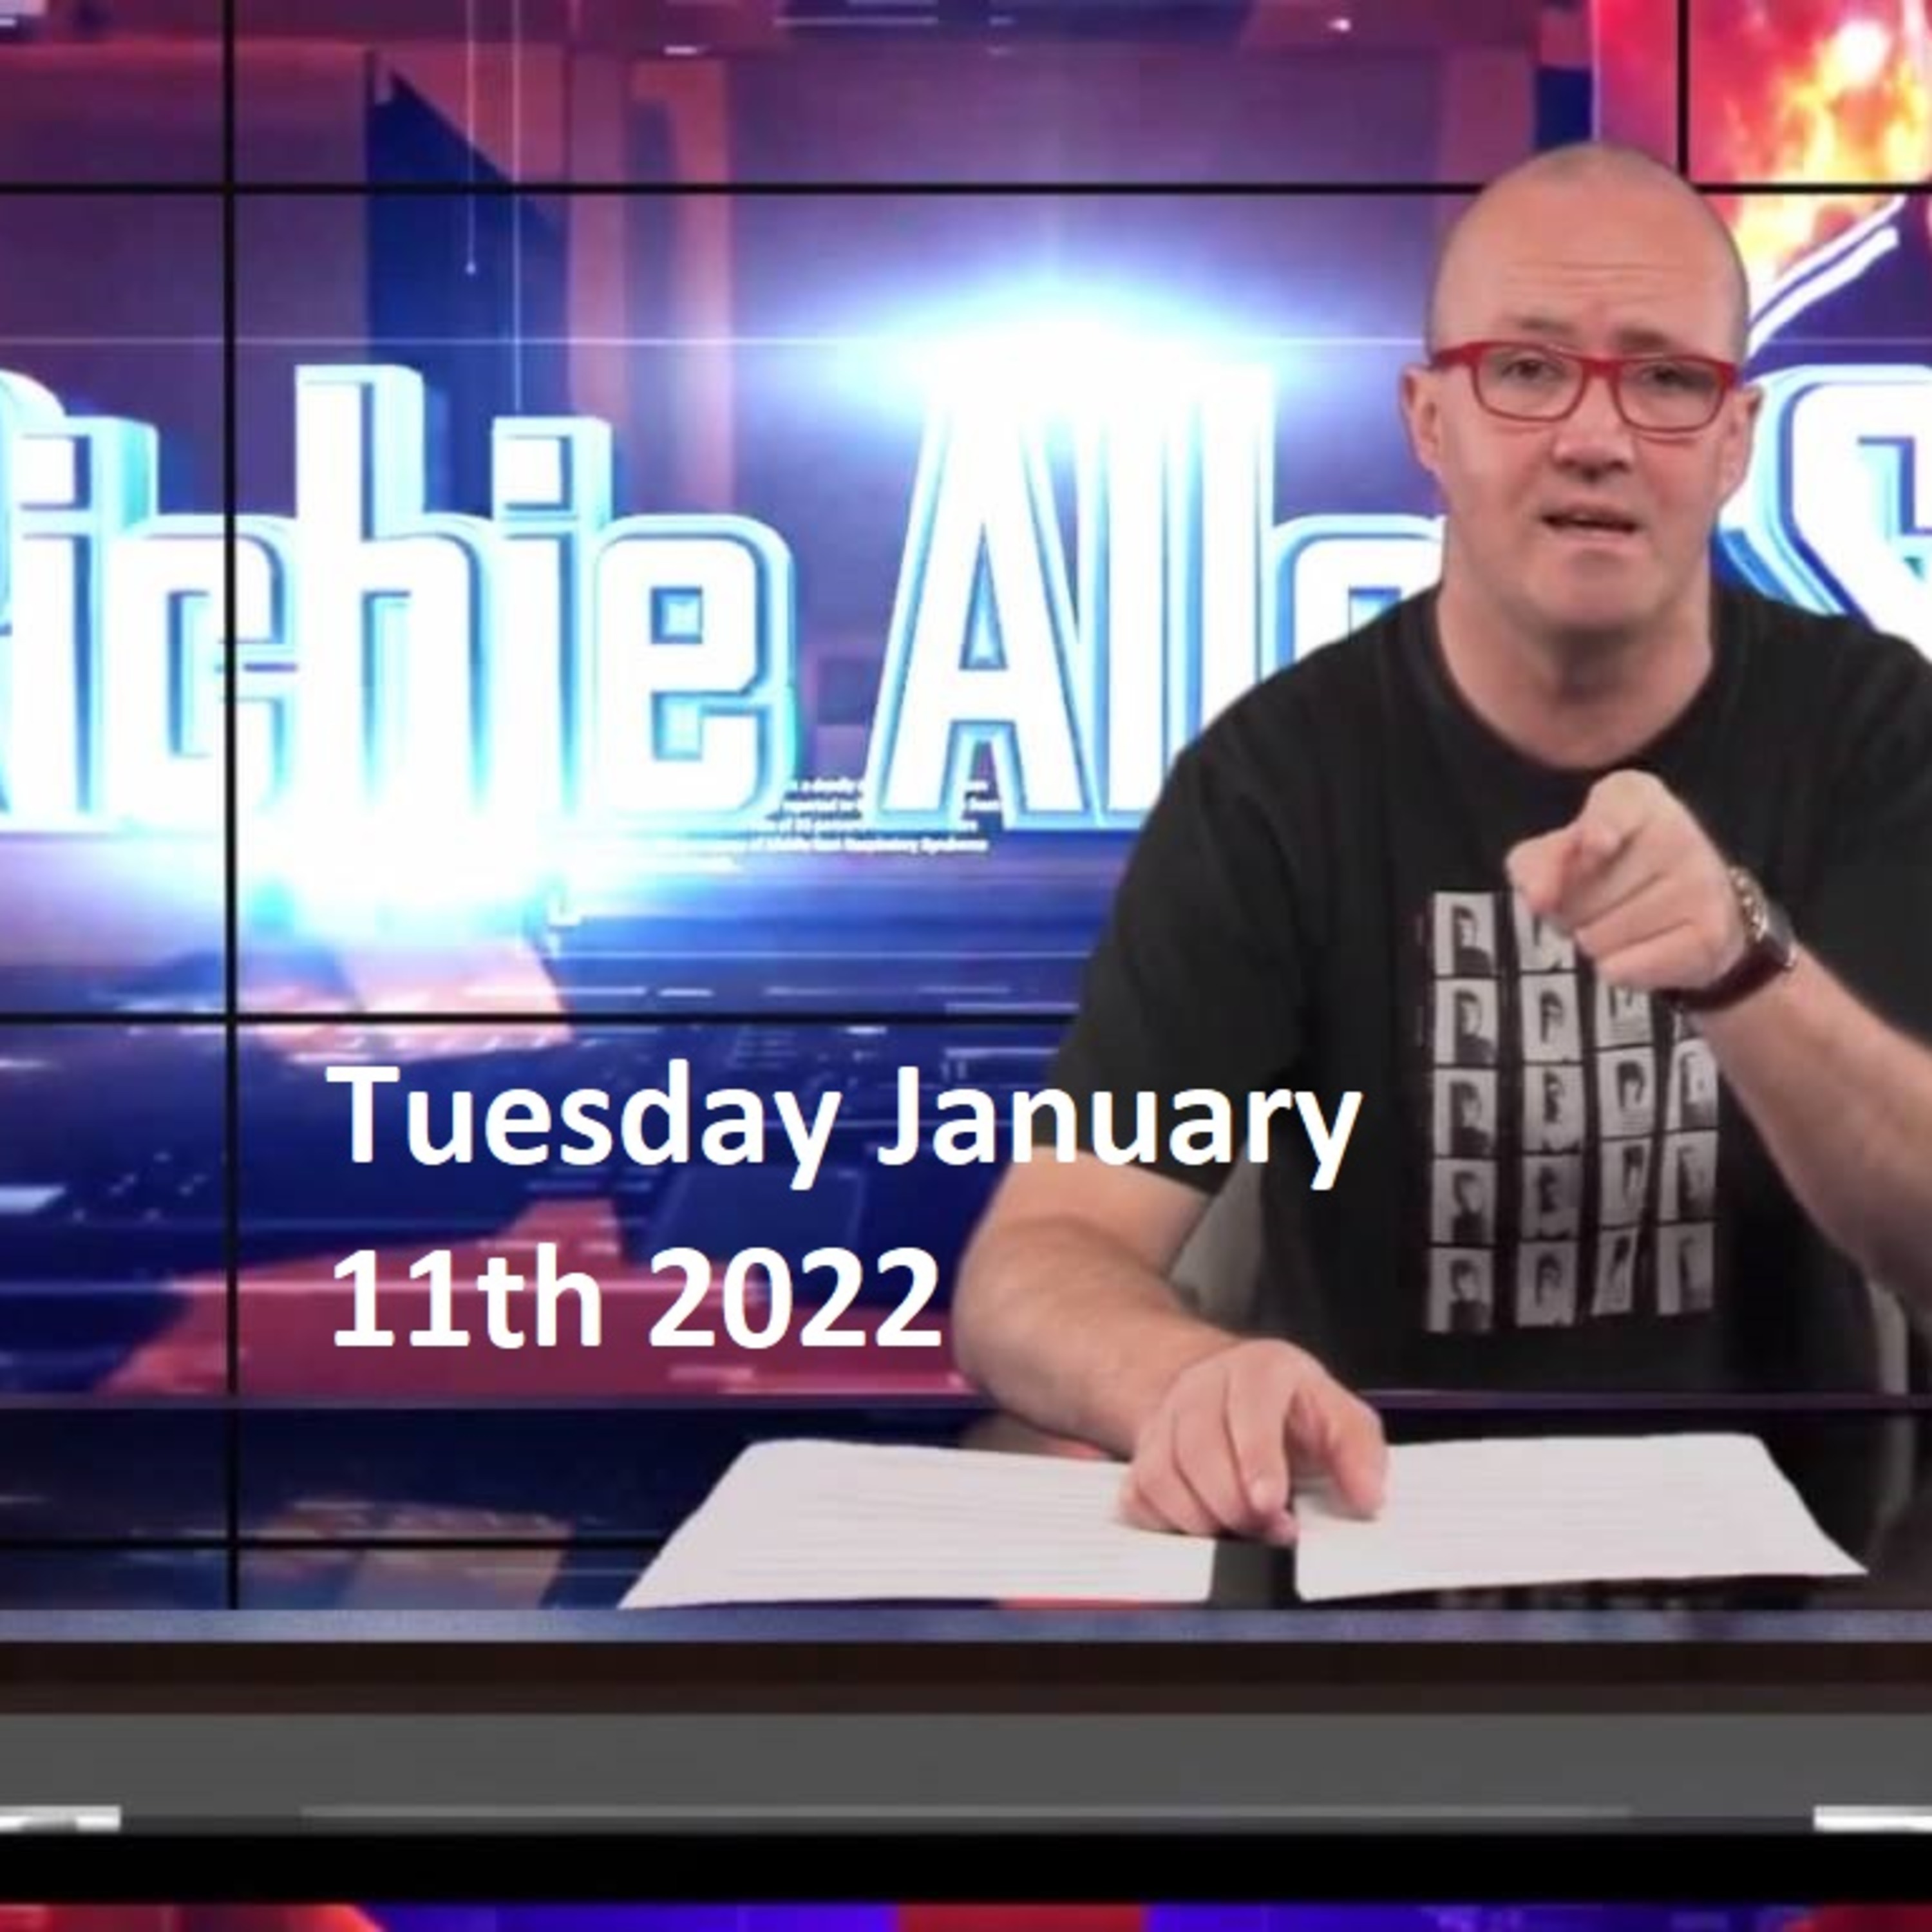 Episode 1387: The Richie Allen Show Tuesday January 11th 2022